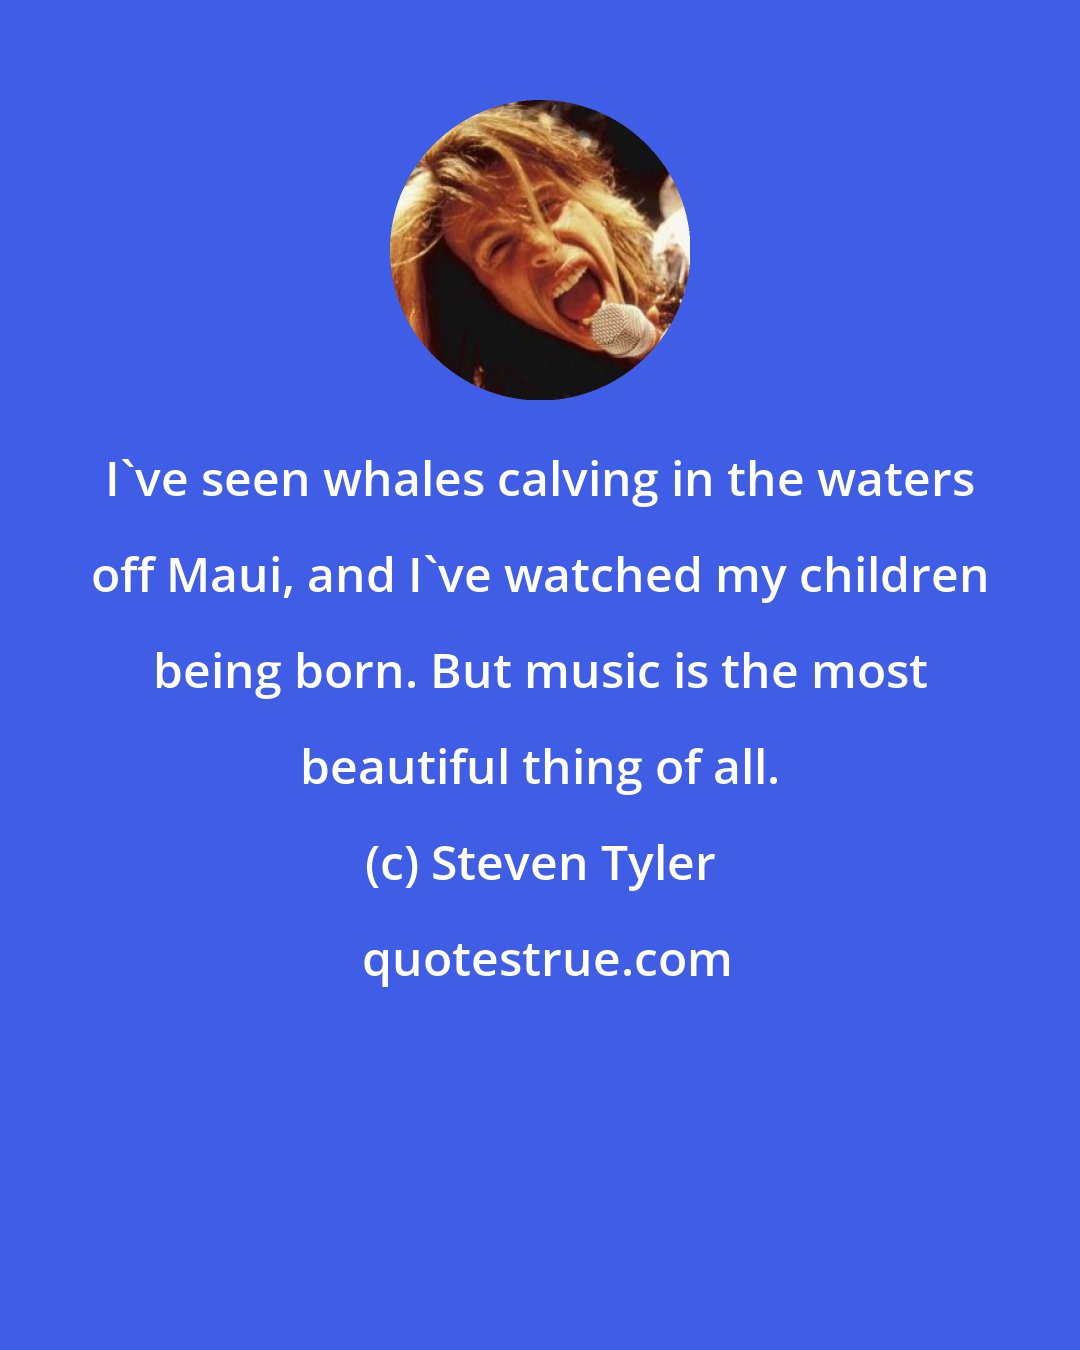 Steven Tyler: I've seen whales calving in the waters off Maui, and I've watched my children being born. But music is the most beautiful thing of all.